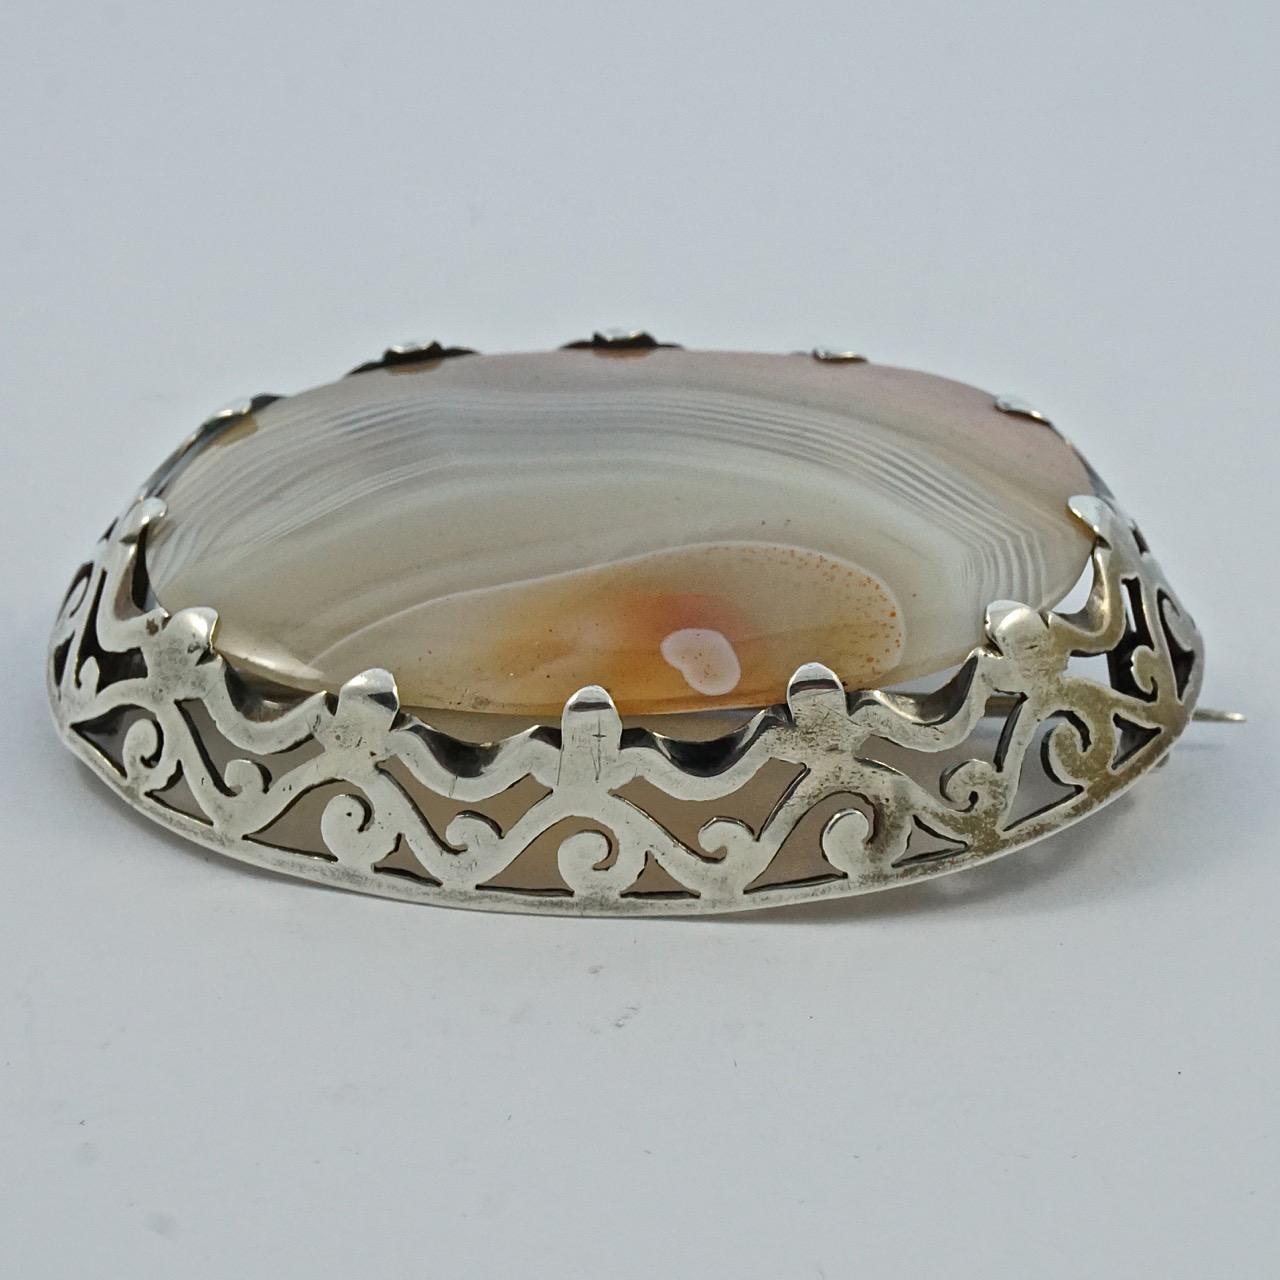 Wonderful antique Victorian large agate brooch, with a decorative swirl design edging. The brooch tests for silver and has the old 